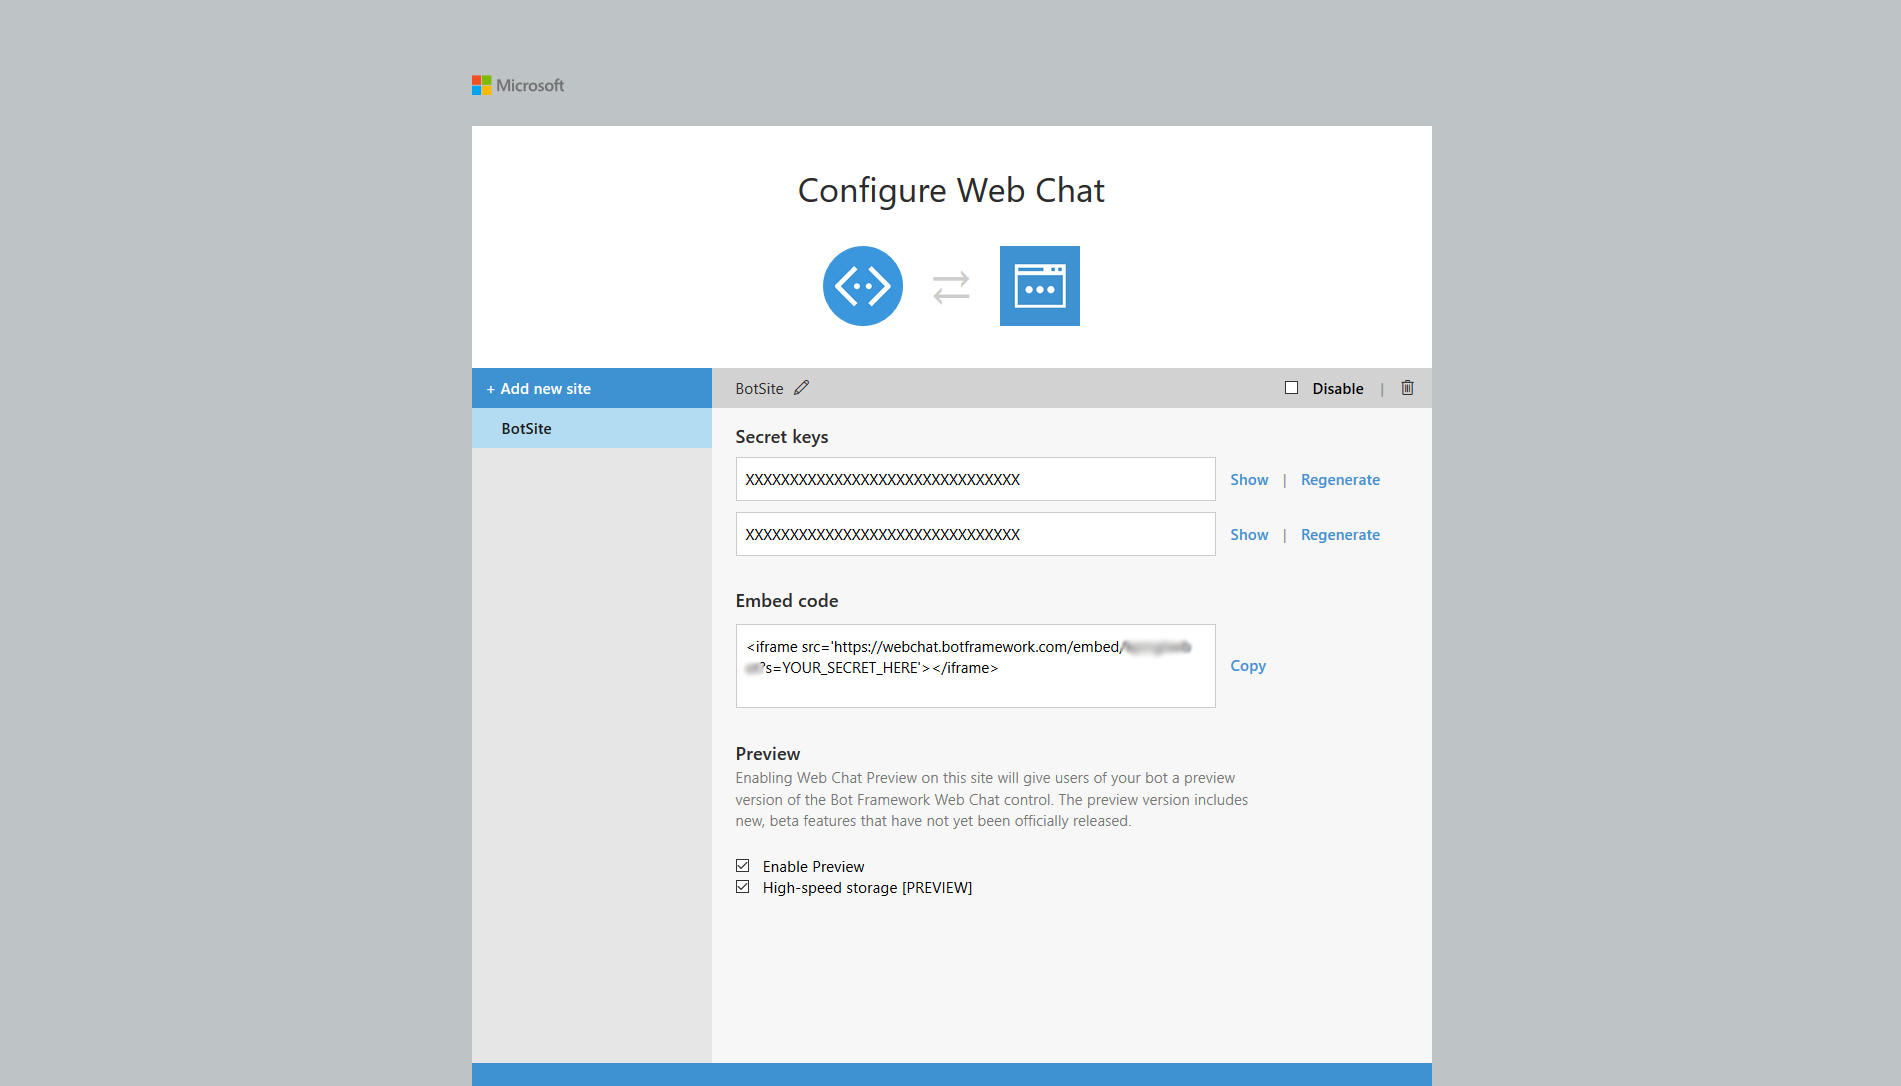 Configuring web chat